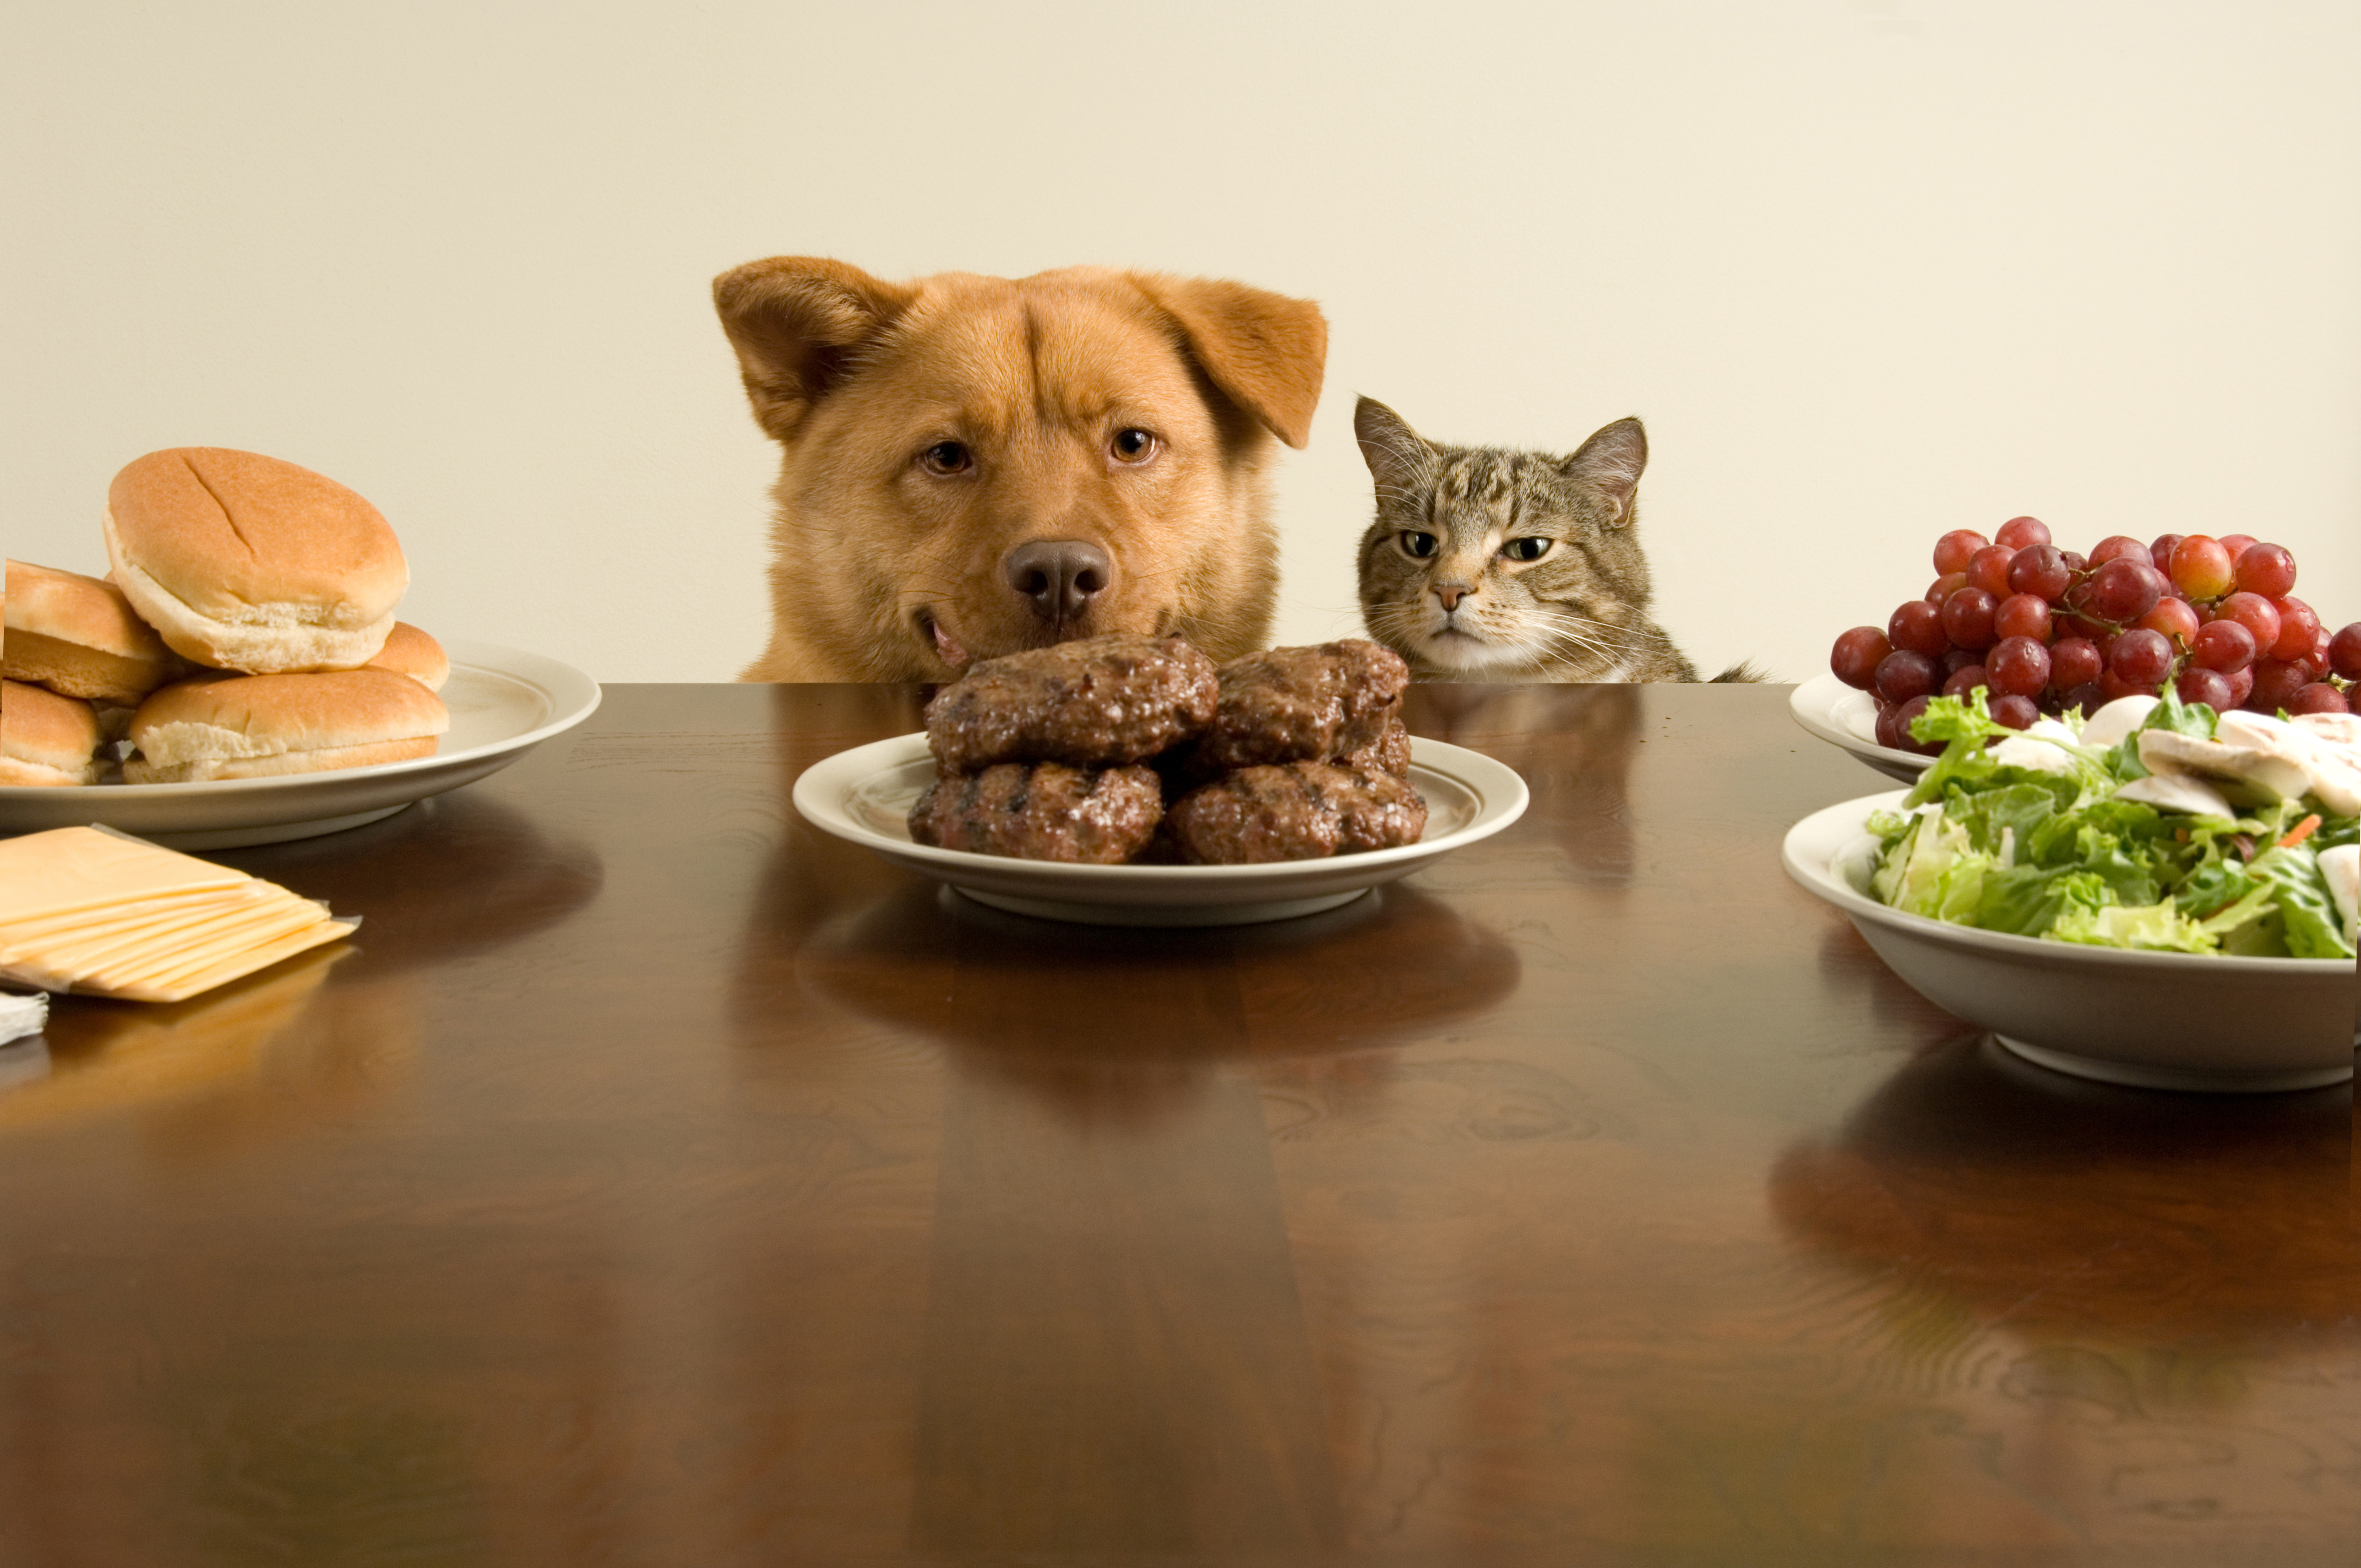 This time, we go on the count of one. (Dog and cat ready for the feast)